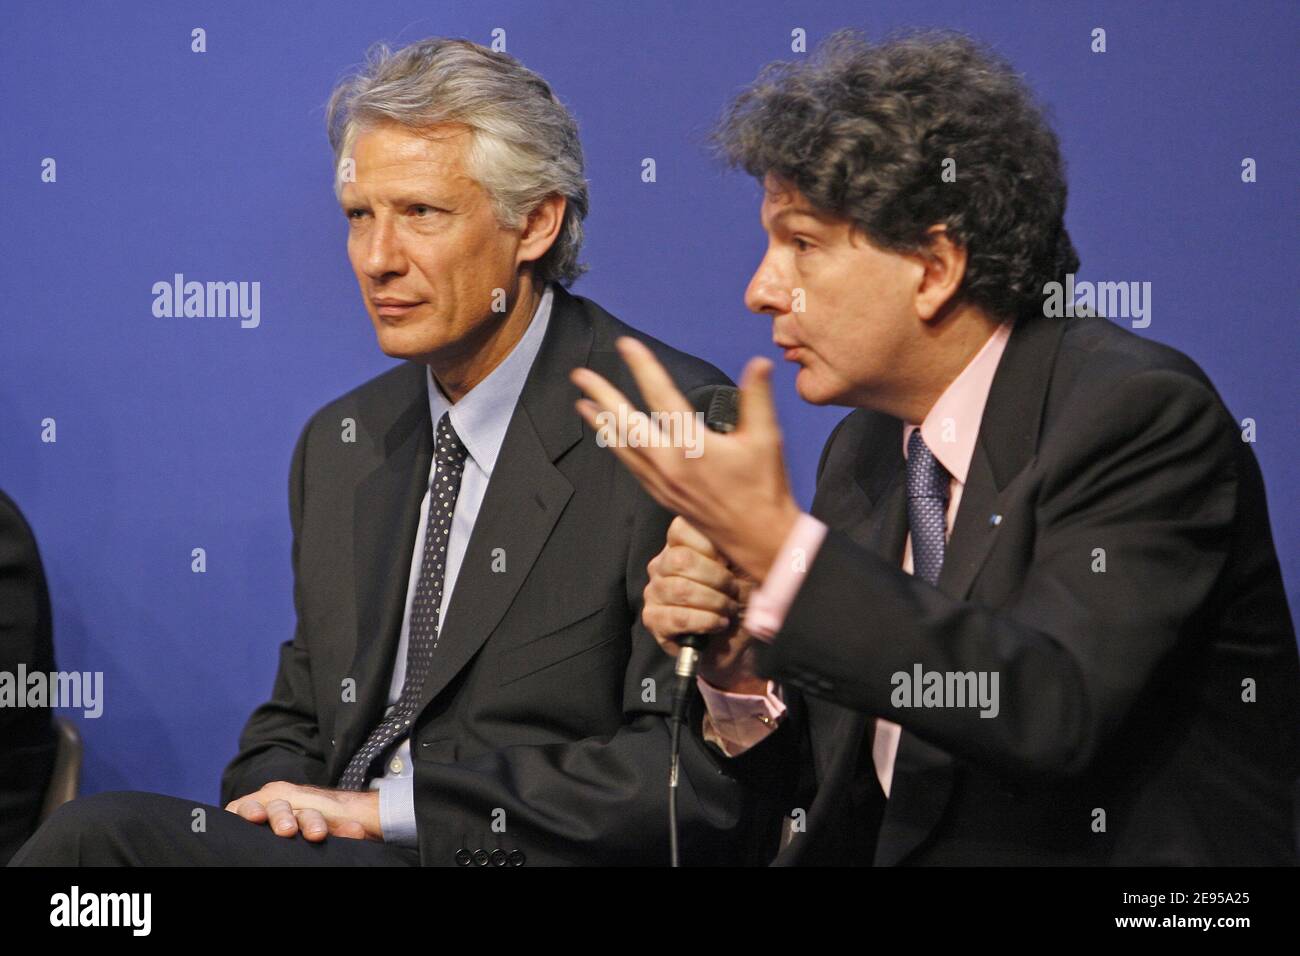 Prime Minister Dominique de Villepin with Thierry Breton, Minister for the Economy, Finance and Industry present plans to reduce the country's massive debt during a meeting on public finances in Paris, France, on January 12, 2006. Photo by Mehdi Taamallah/ABACAPRESS.COM Stock Photo